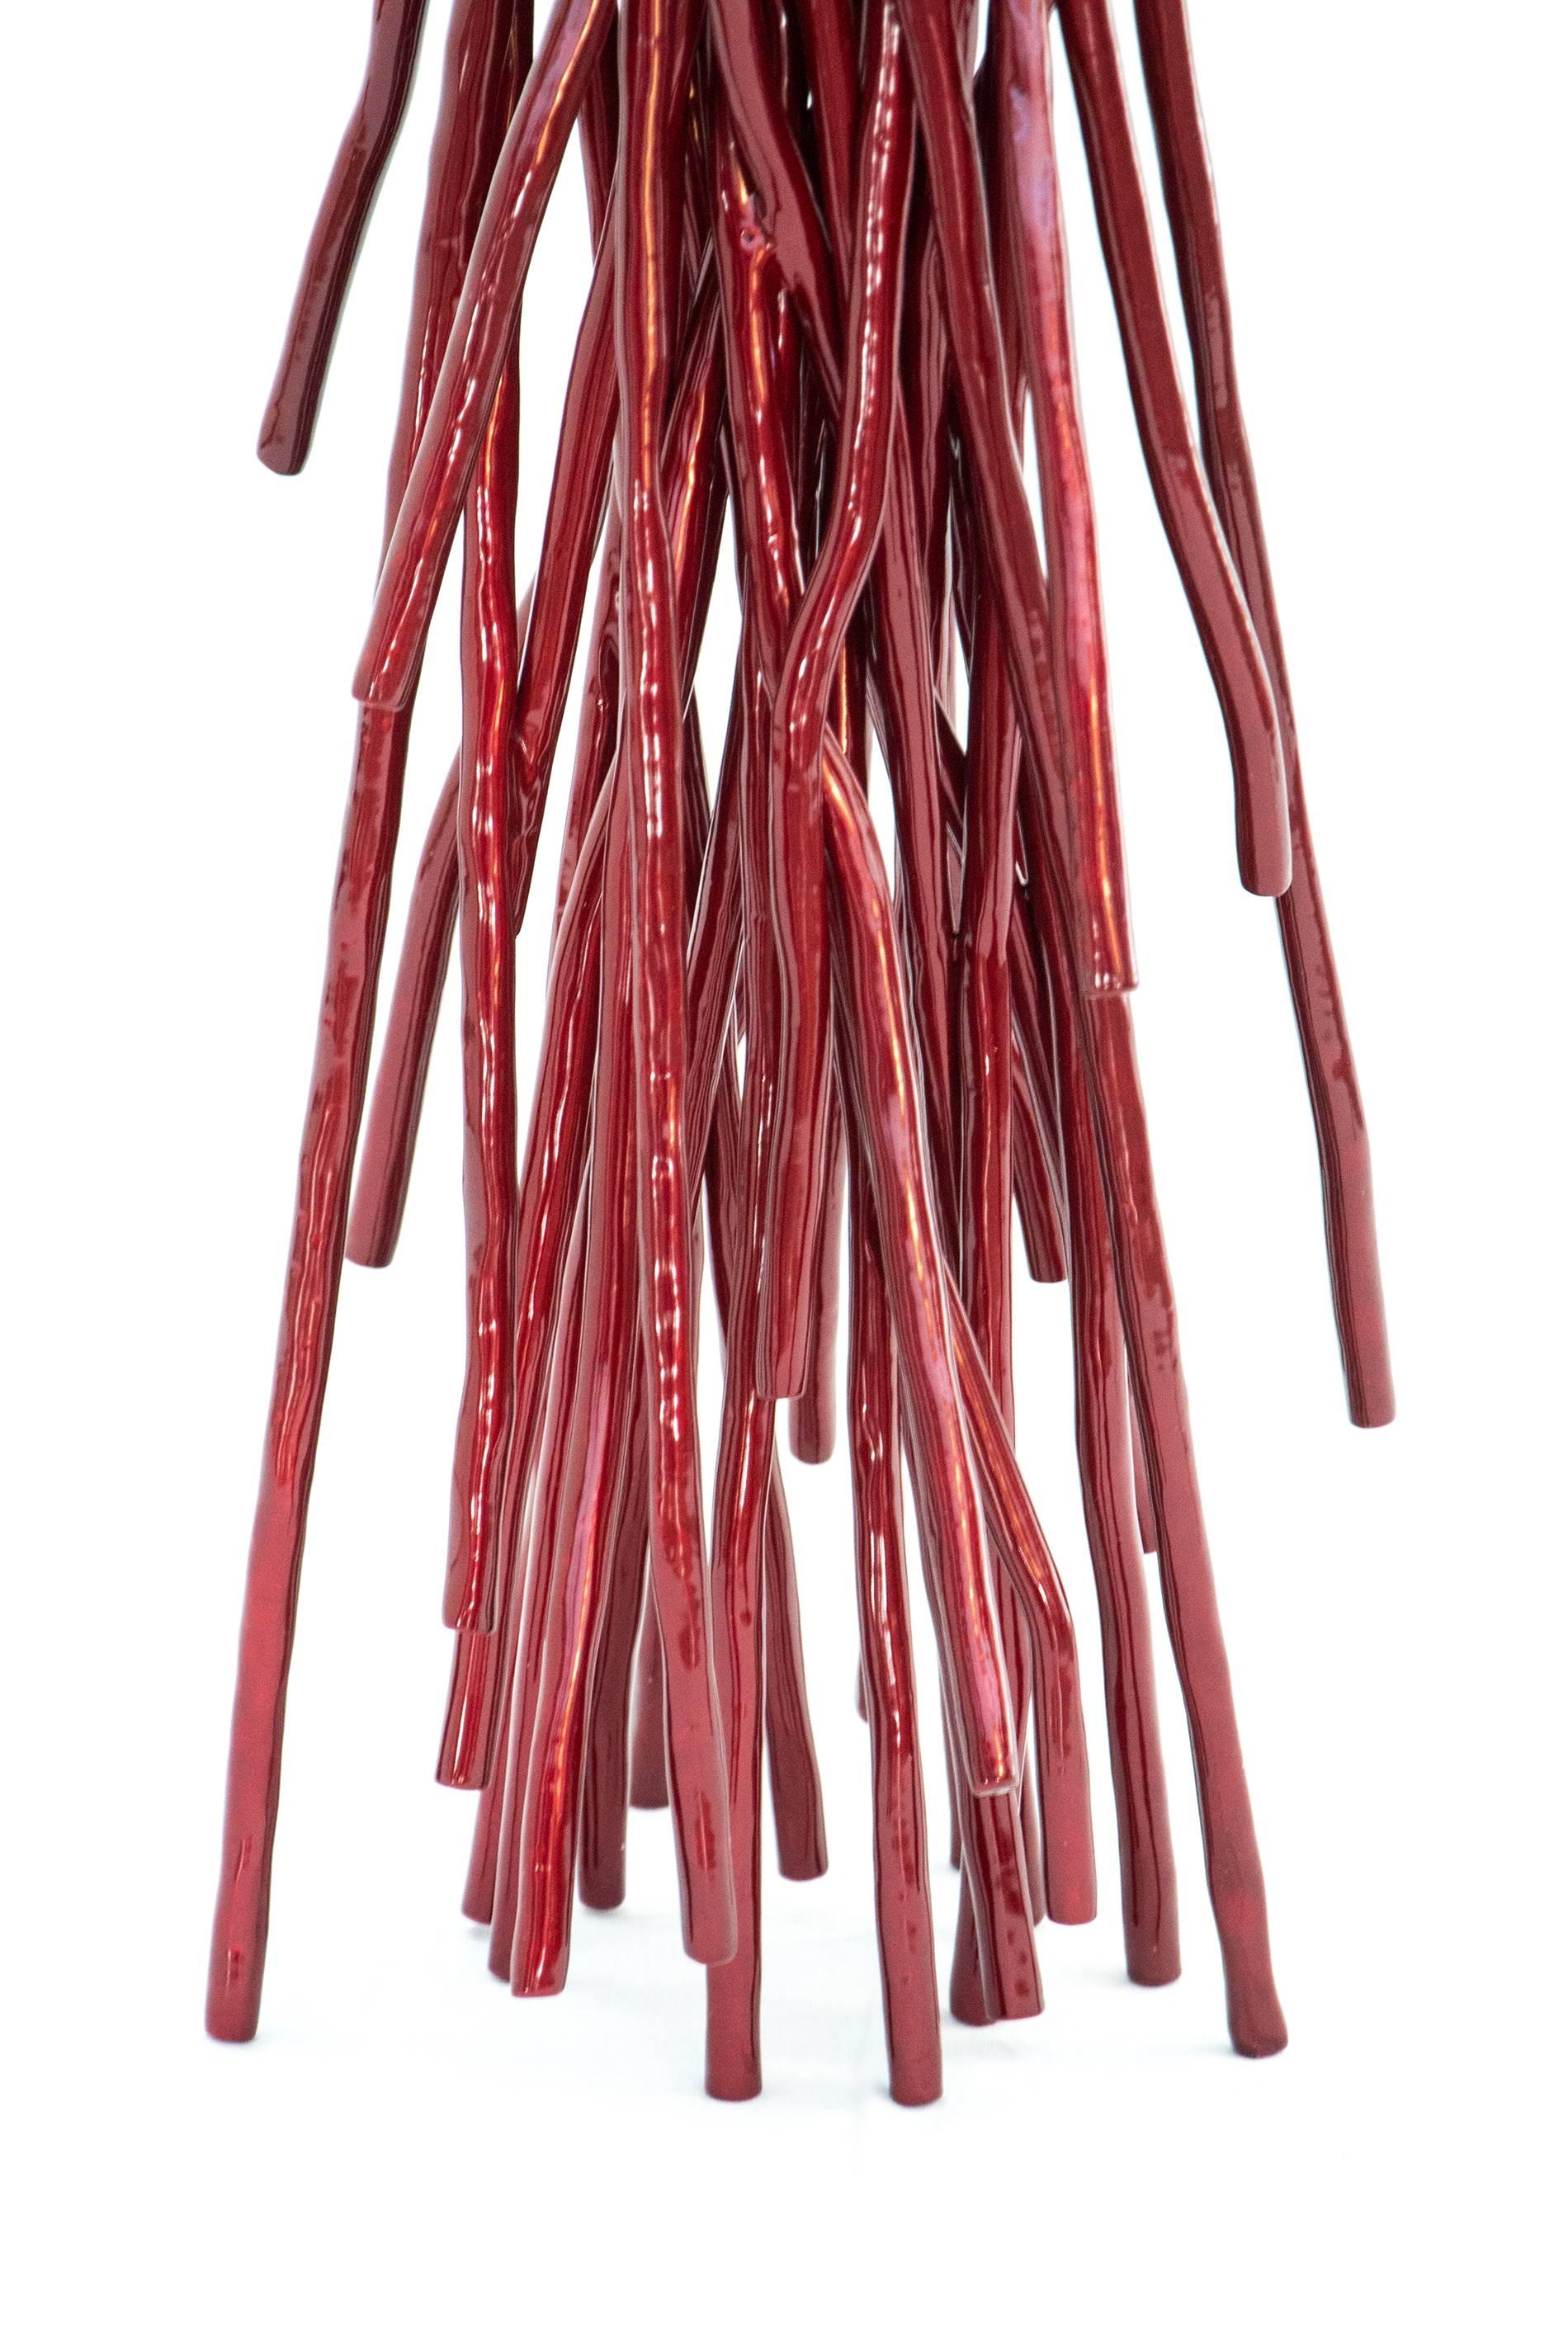 Torrential Series, Candy Red - Sculpture by Shayne Dark